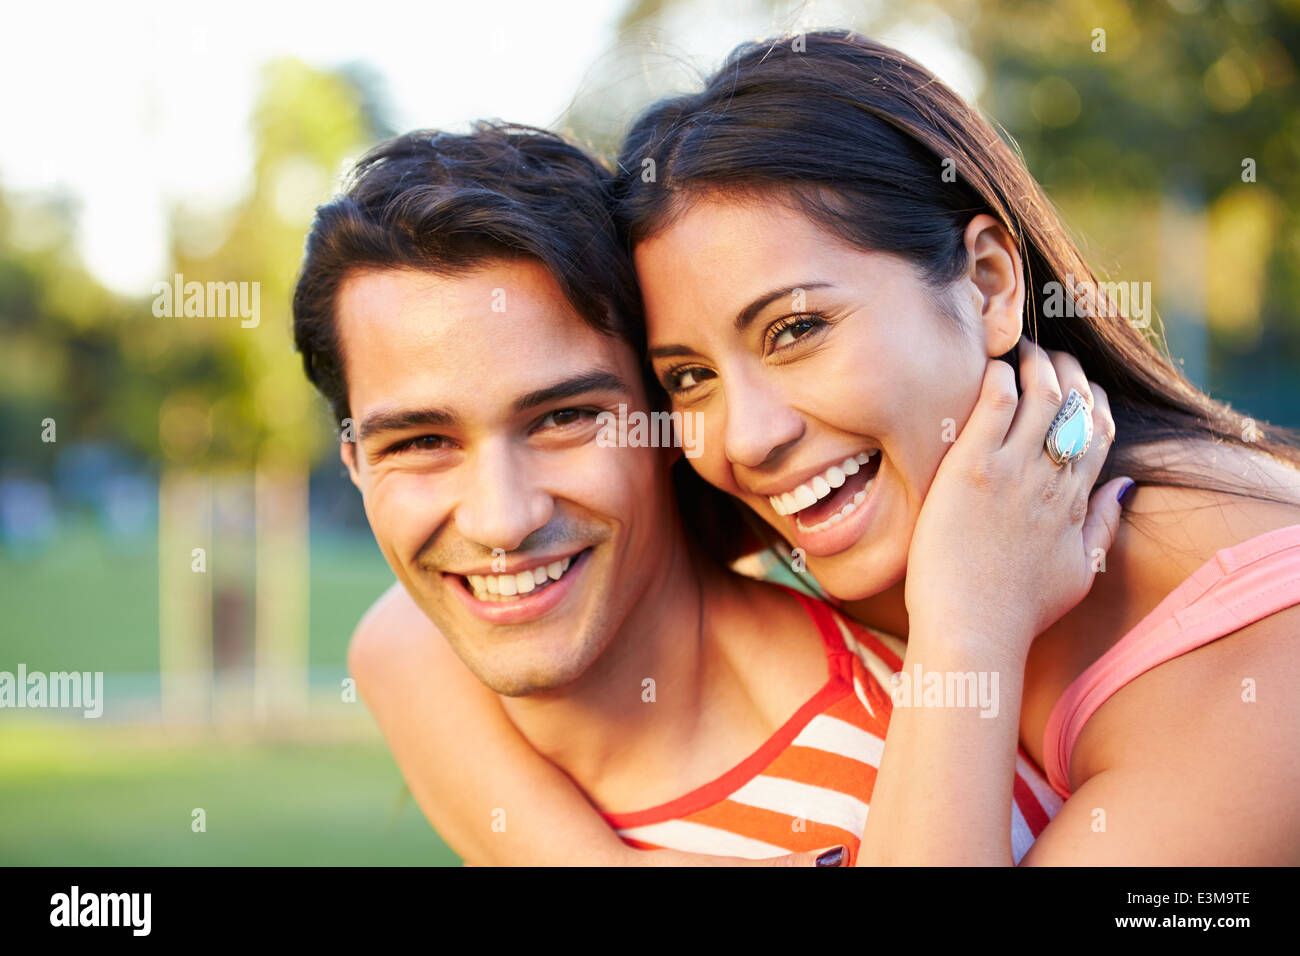 Outdoor Portrait Of Romantic Young Couple In Park Stock Photo